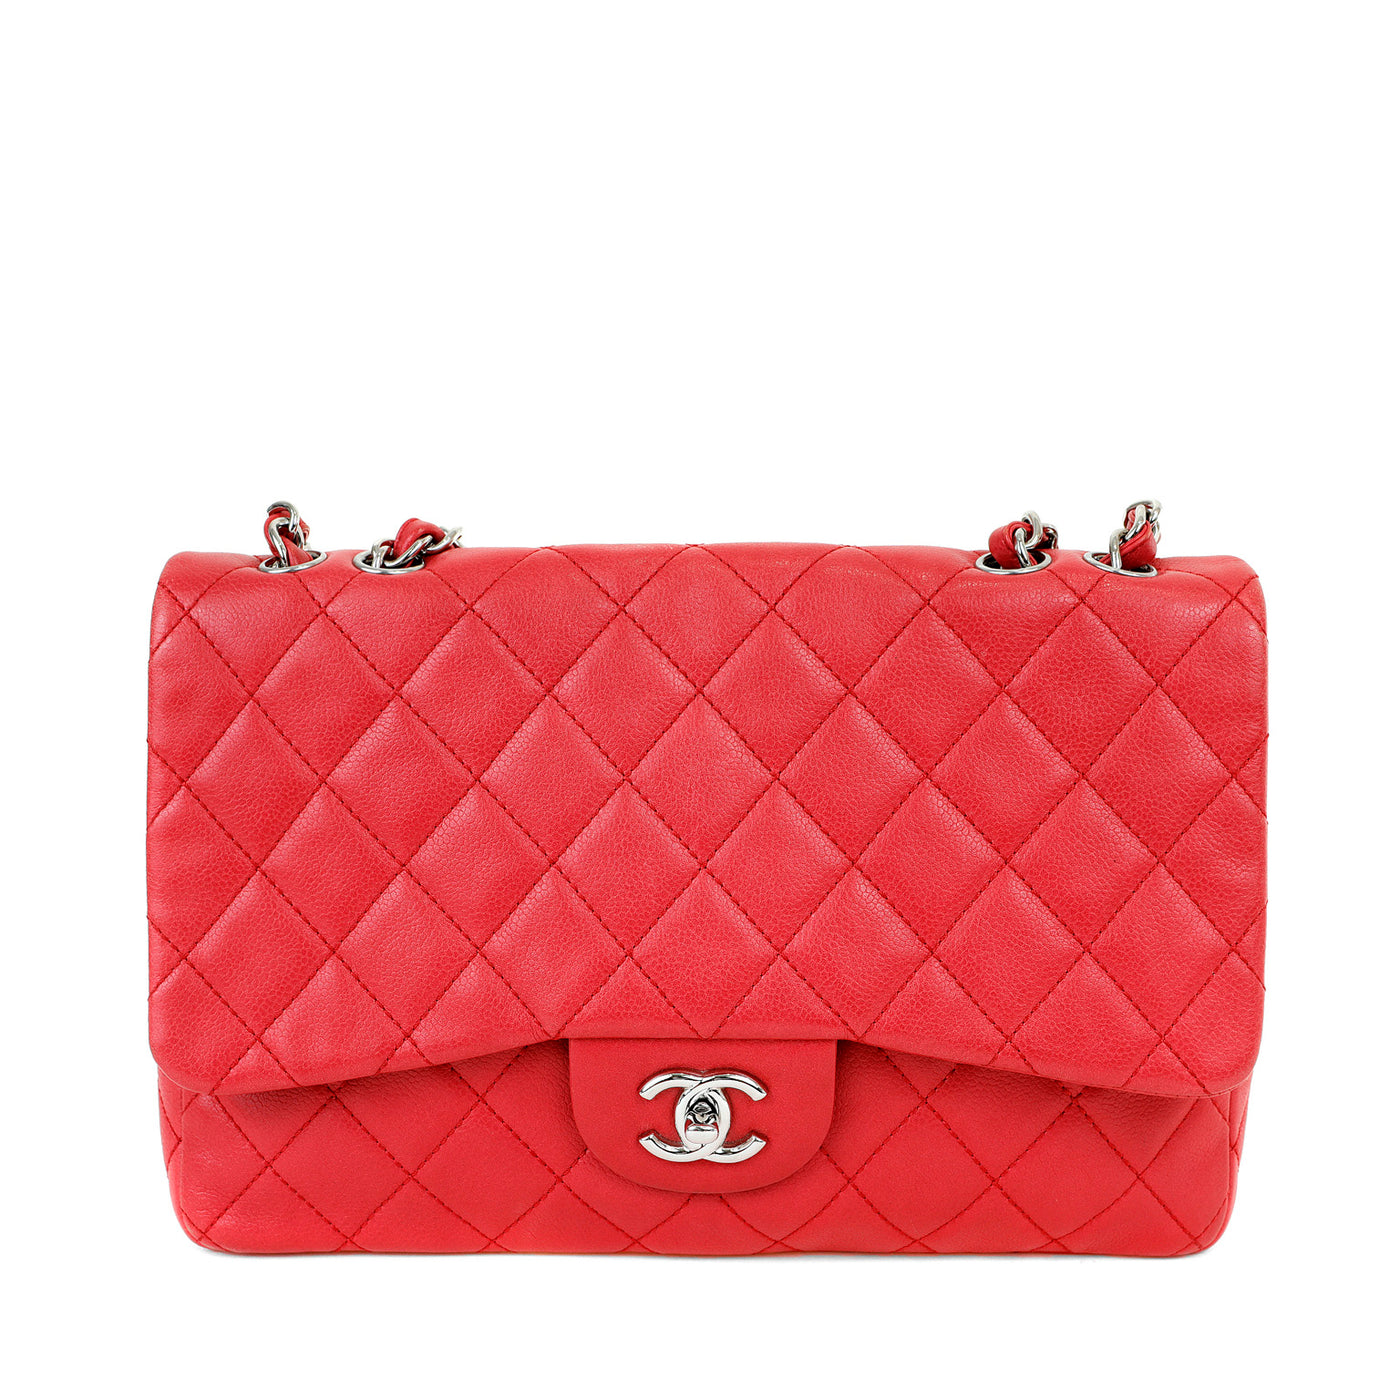 Chanel Red Lipstick Calfskin Single Flap Jumbo Classic with Silver Hardware